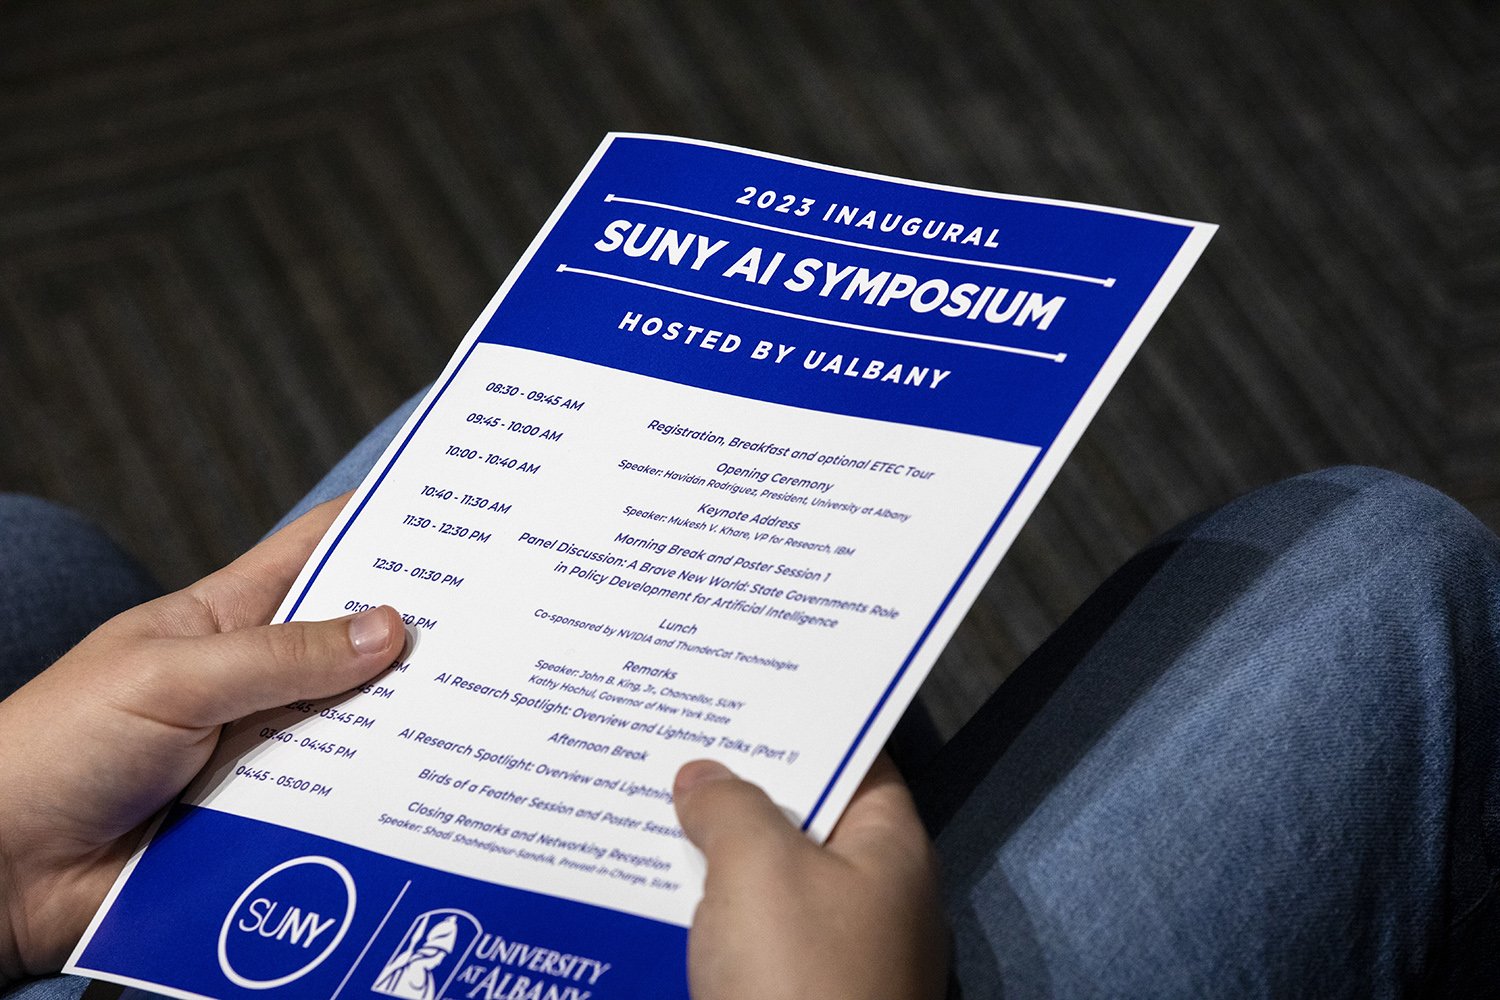 A brochure from the SUNY AI Symposium at ETEC. (Photo by Patrick Dodson)